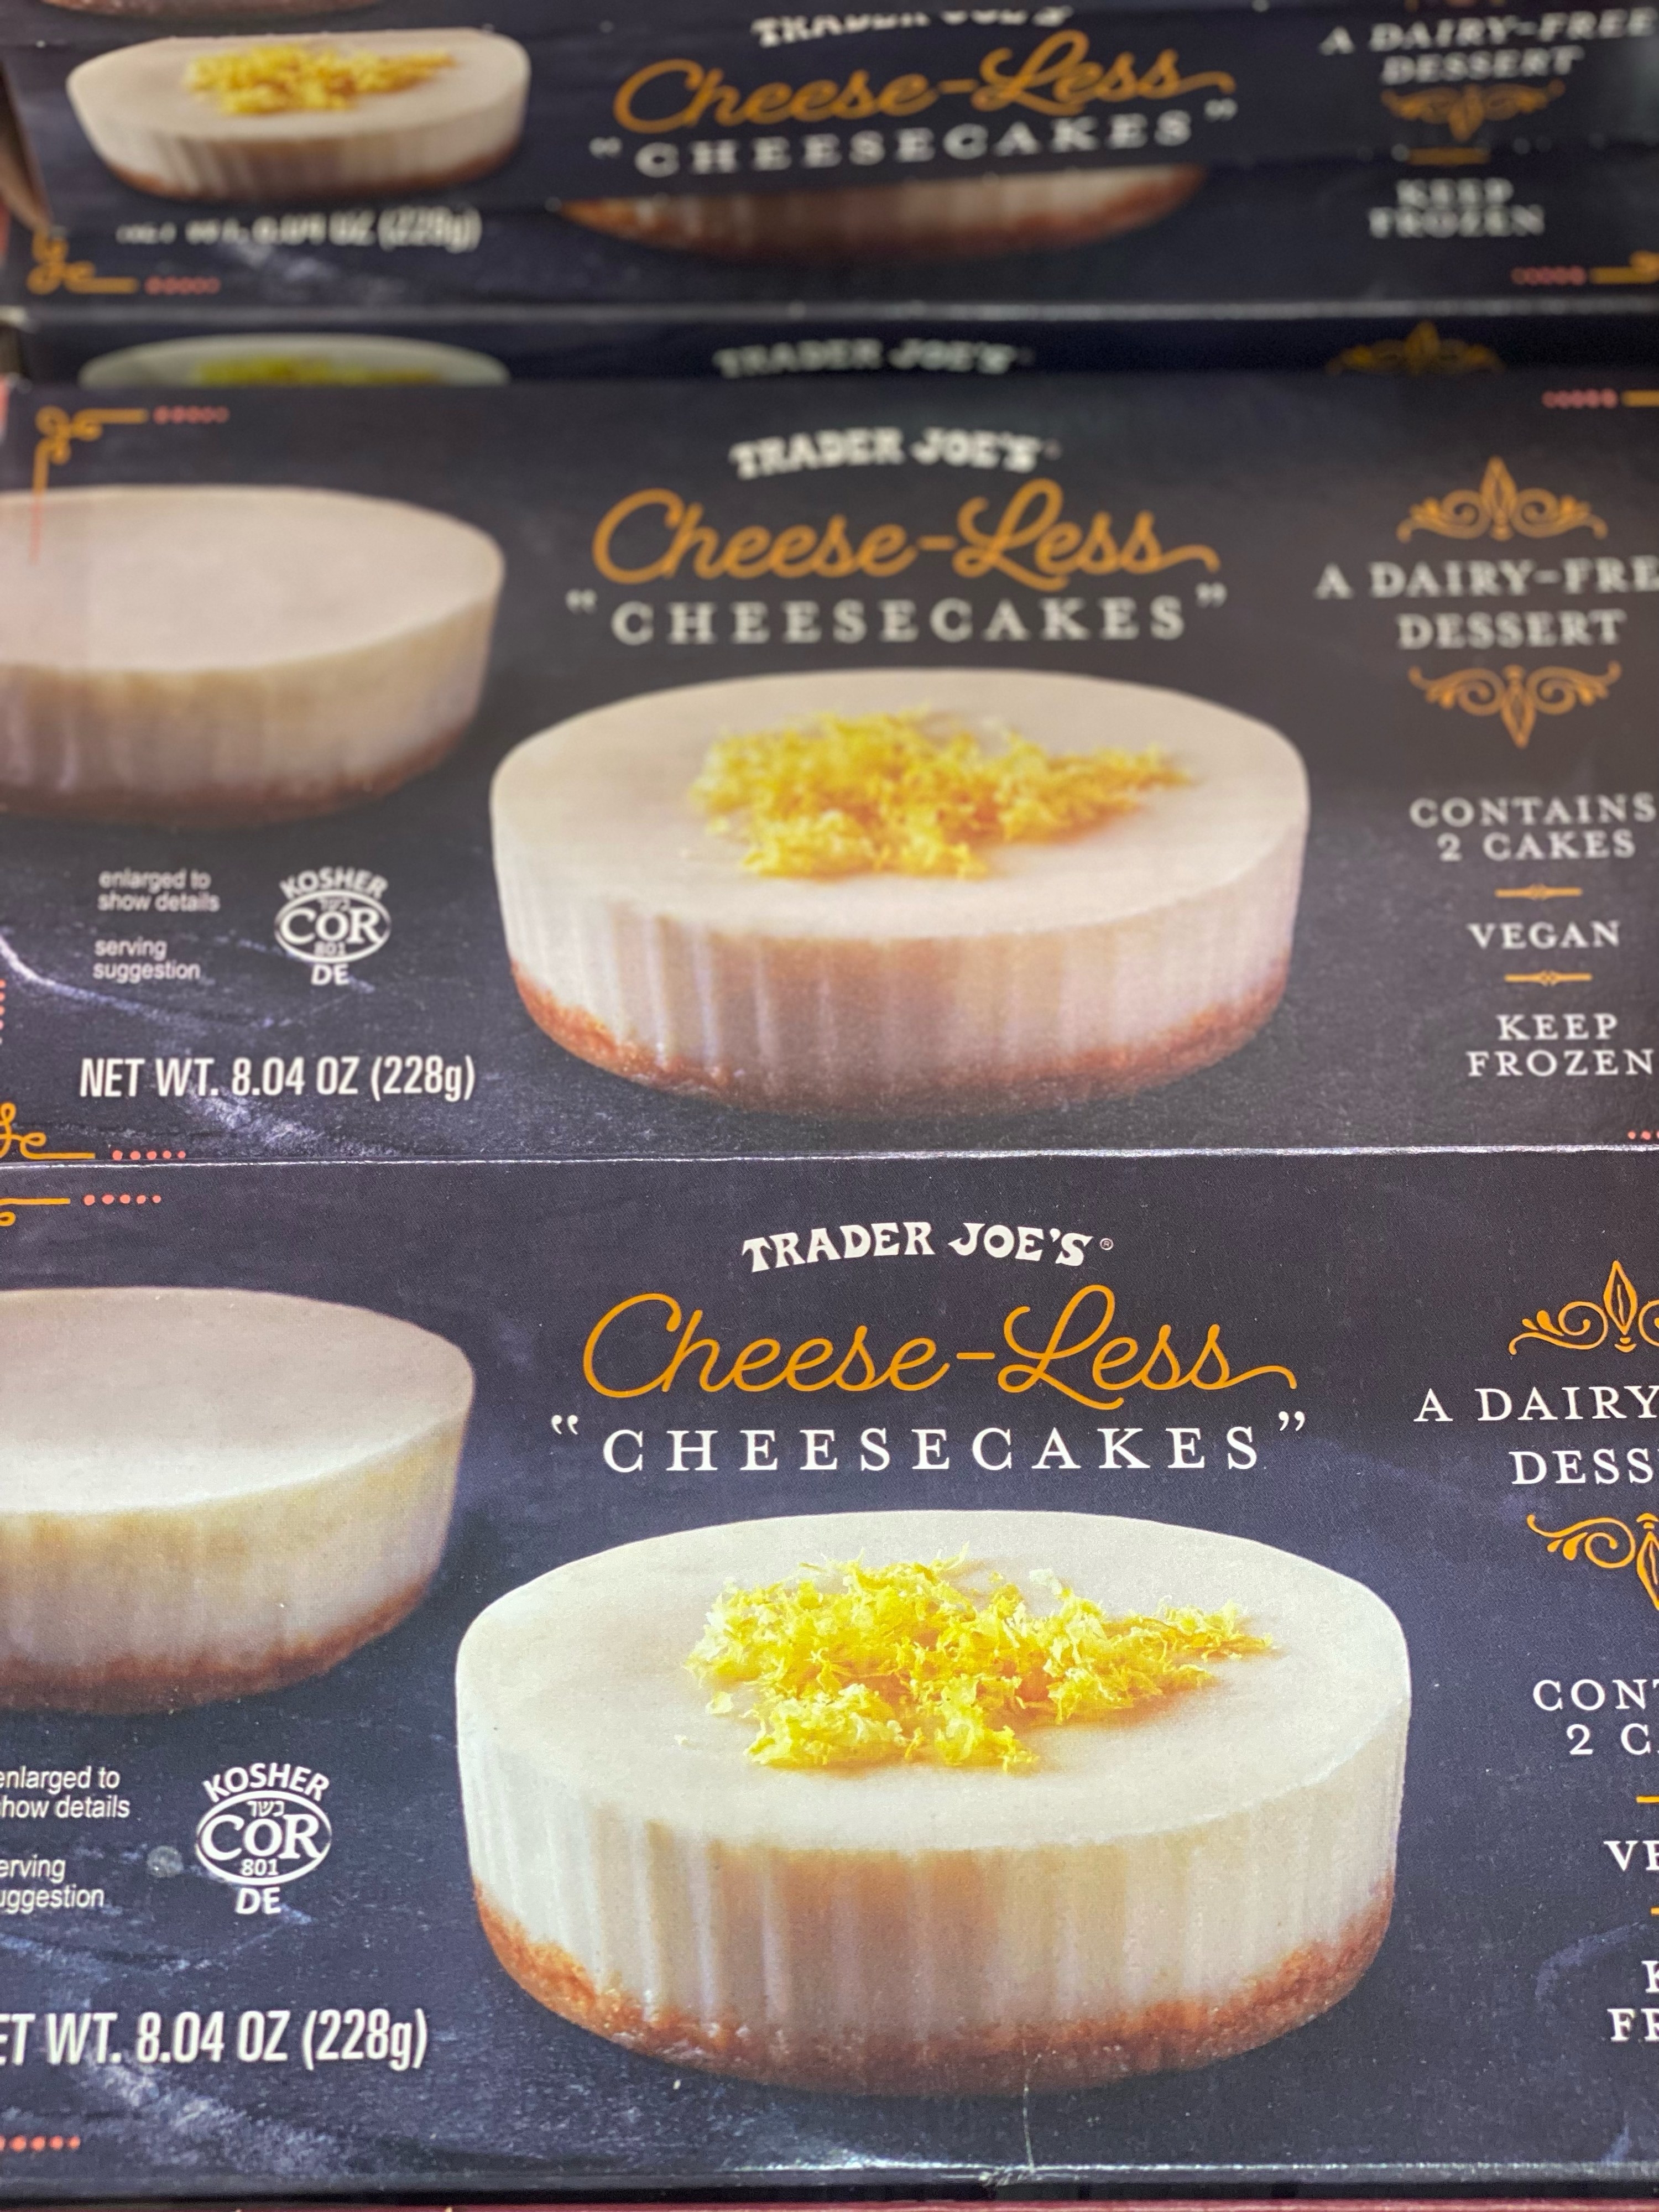 Cheese-Less Cheesecakes